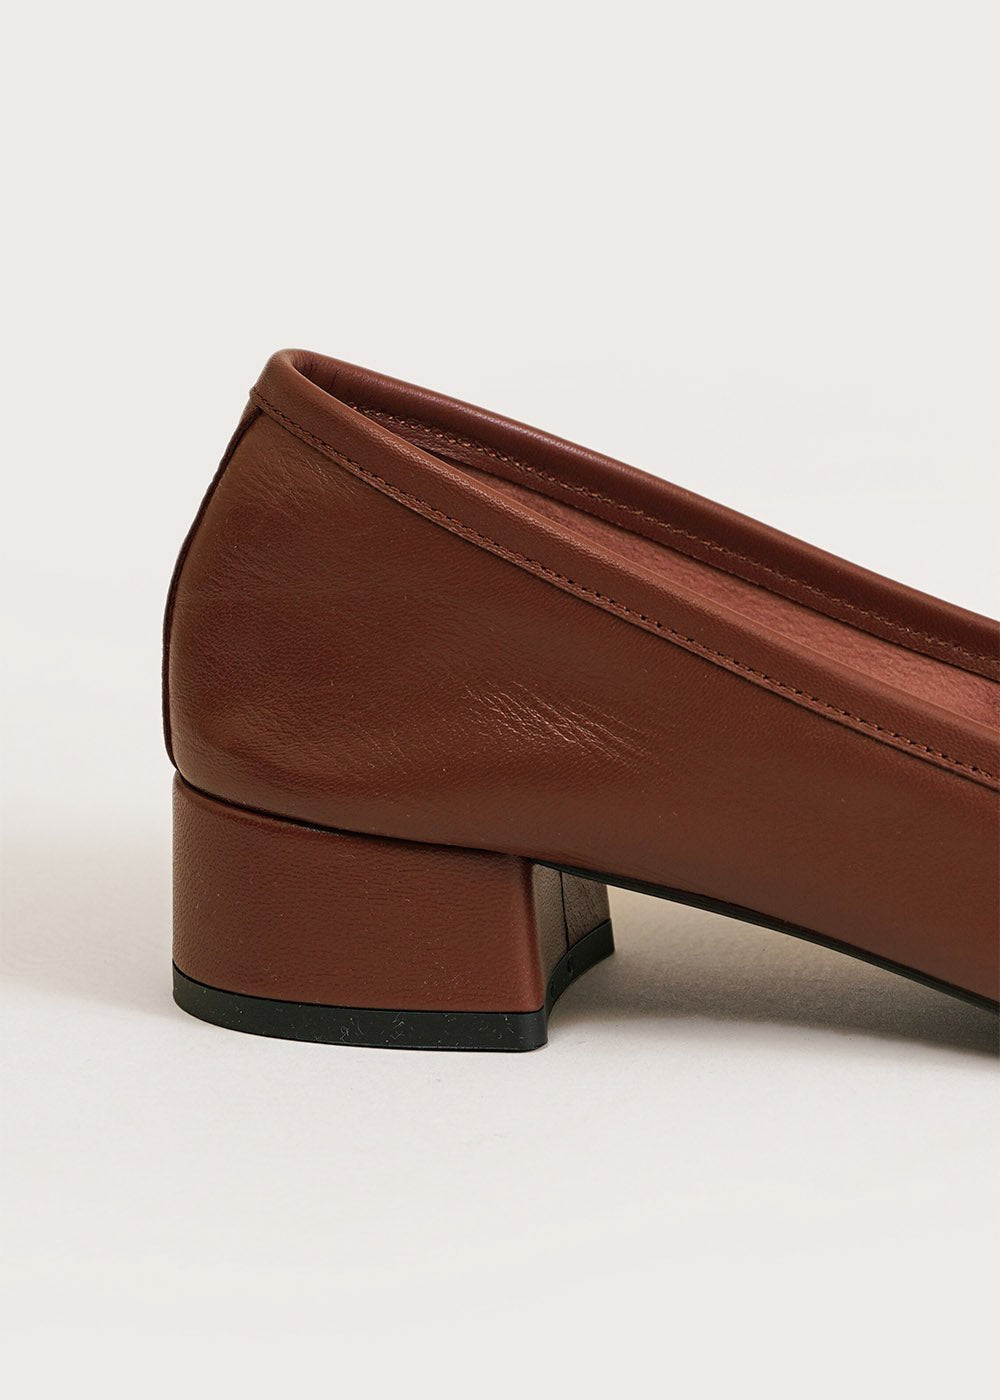 About Arianne Cacao Mina Pumps - New Classics Studios Sustainable Ethical Fashion Canada